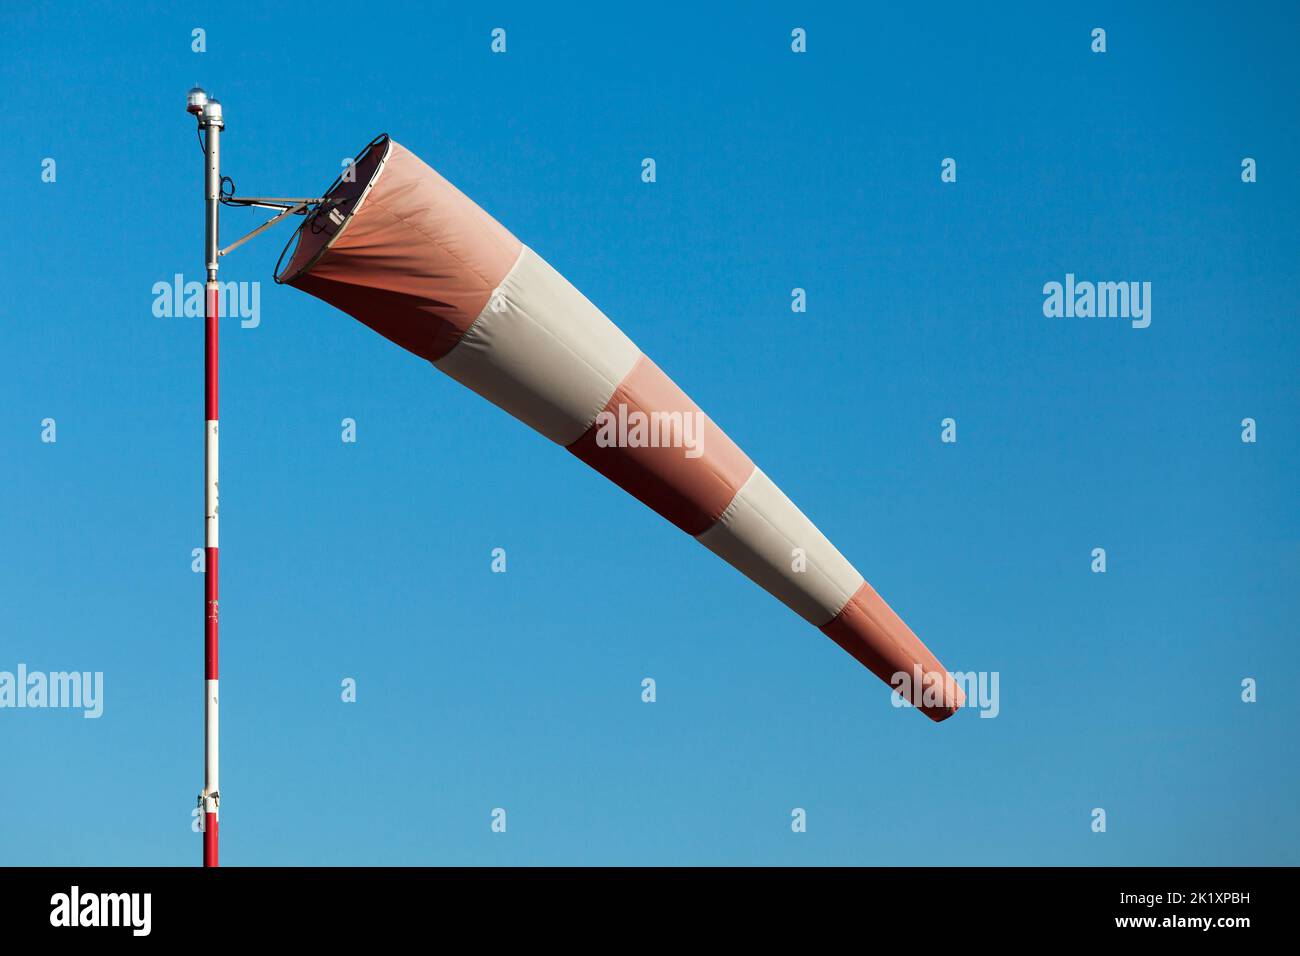 Close-up of an airfield windsock in moderate winds. Stock Photo